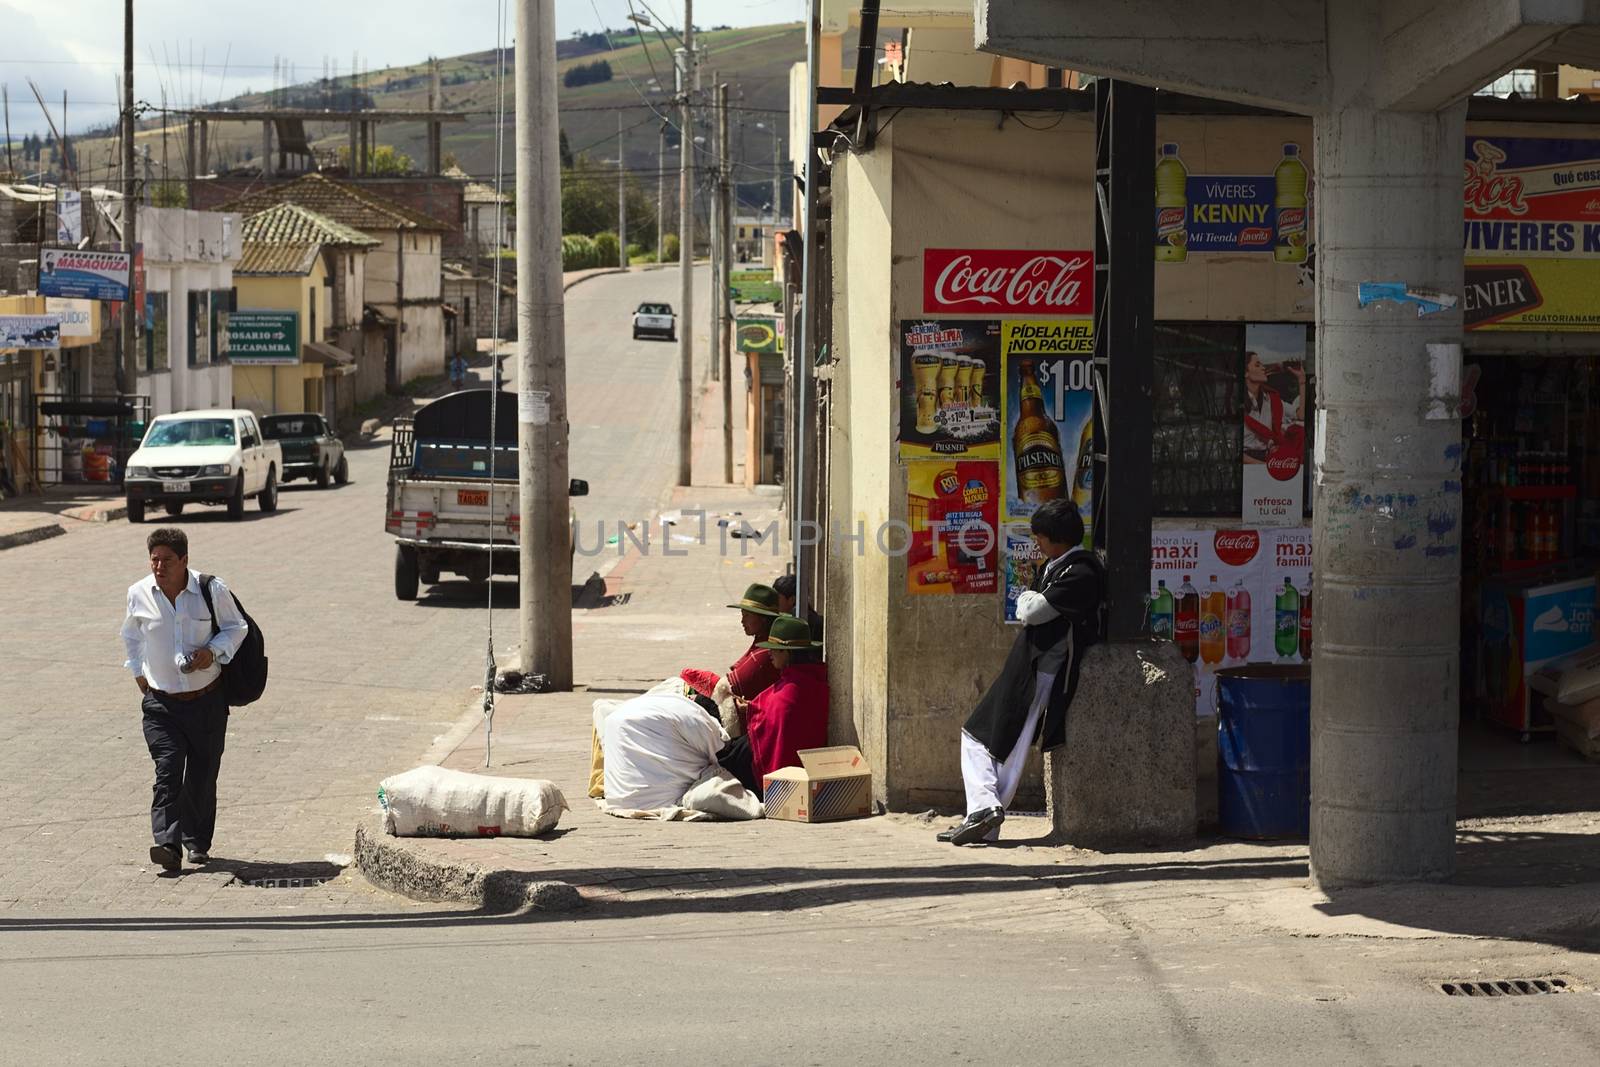 TUNGURAHUA PROVINCE, ECUADOR - JULY 29, 2014: Unidentified people on the street in a settlement along the road between Ambato and Banos on July 29, 2014 in Ecuador. 